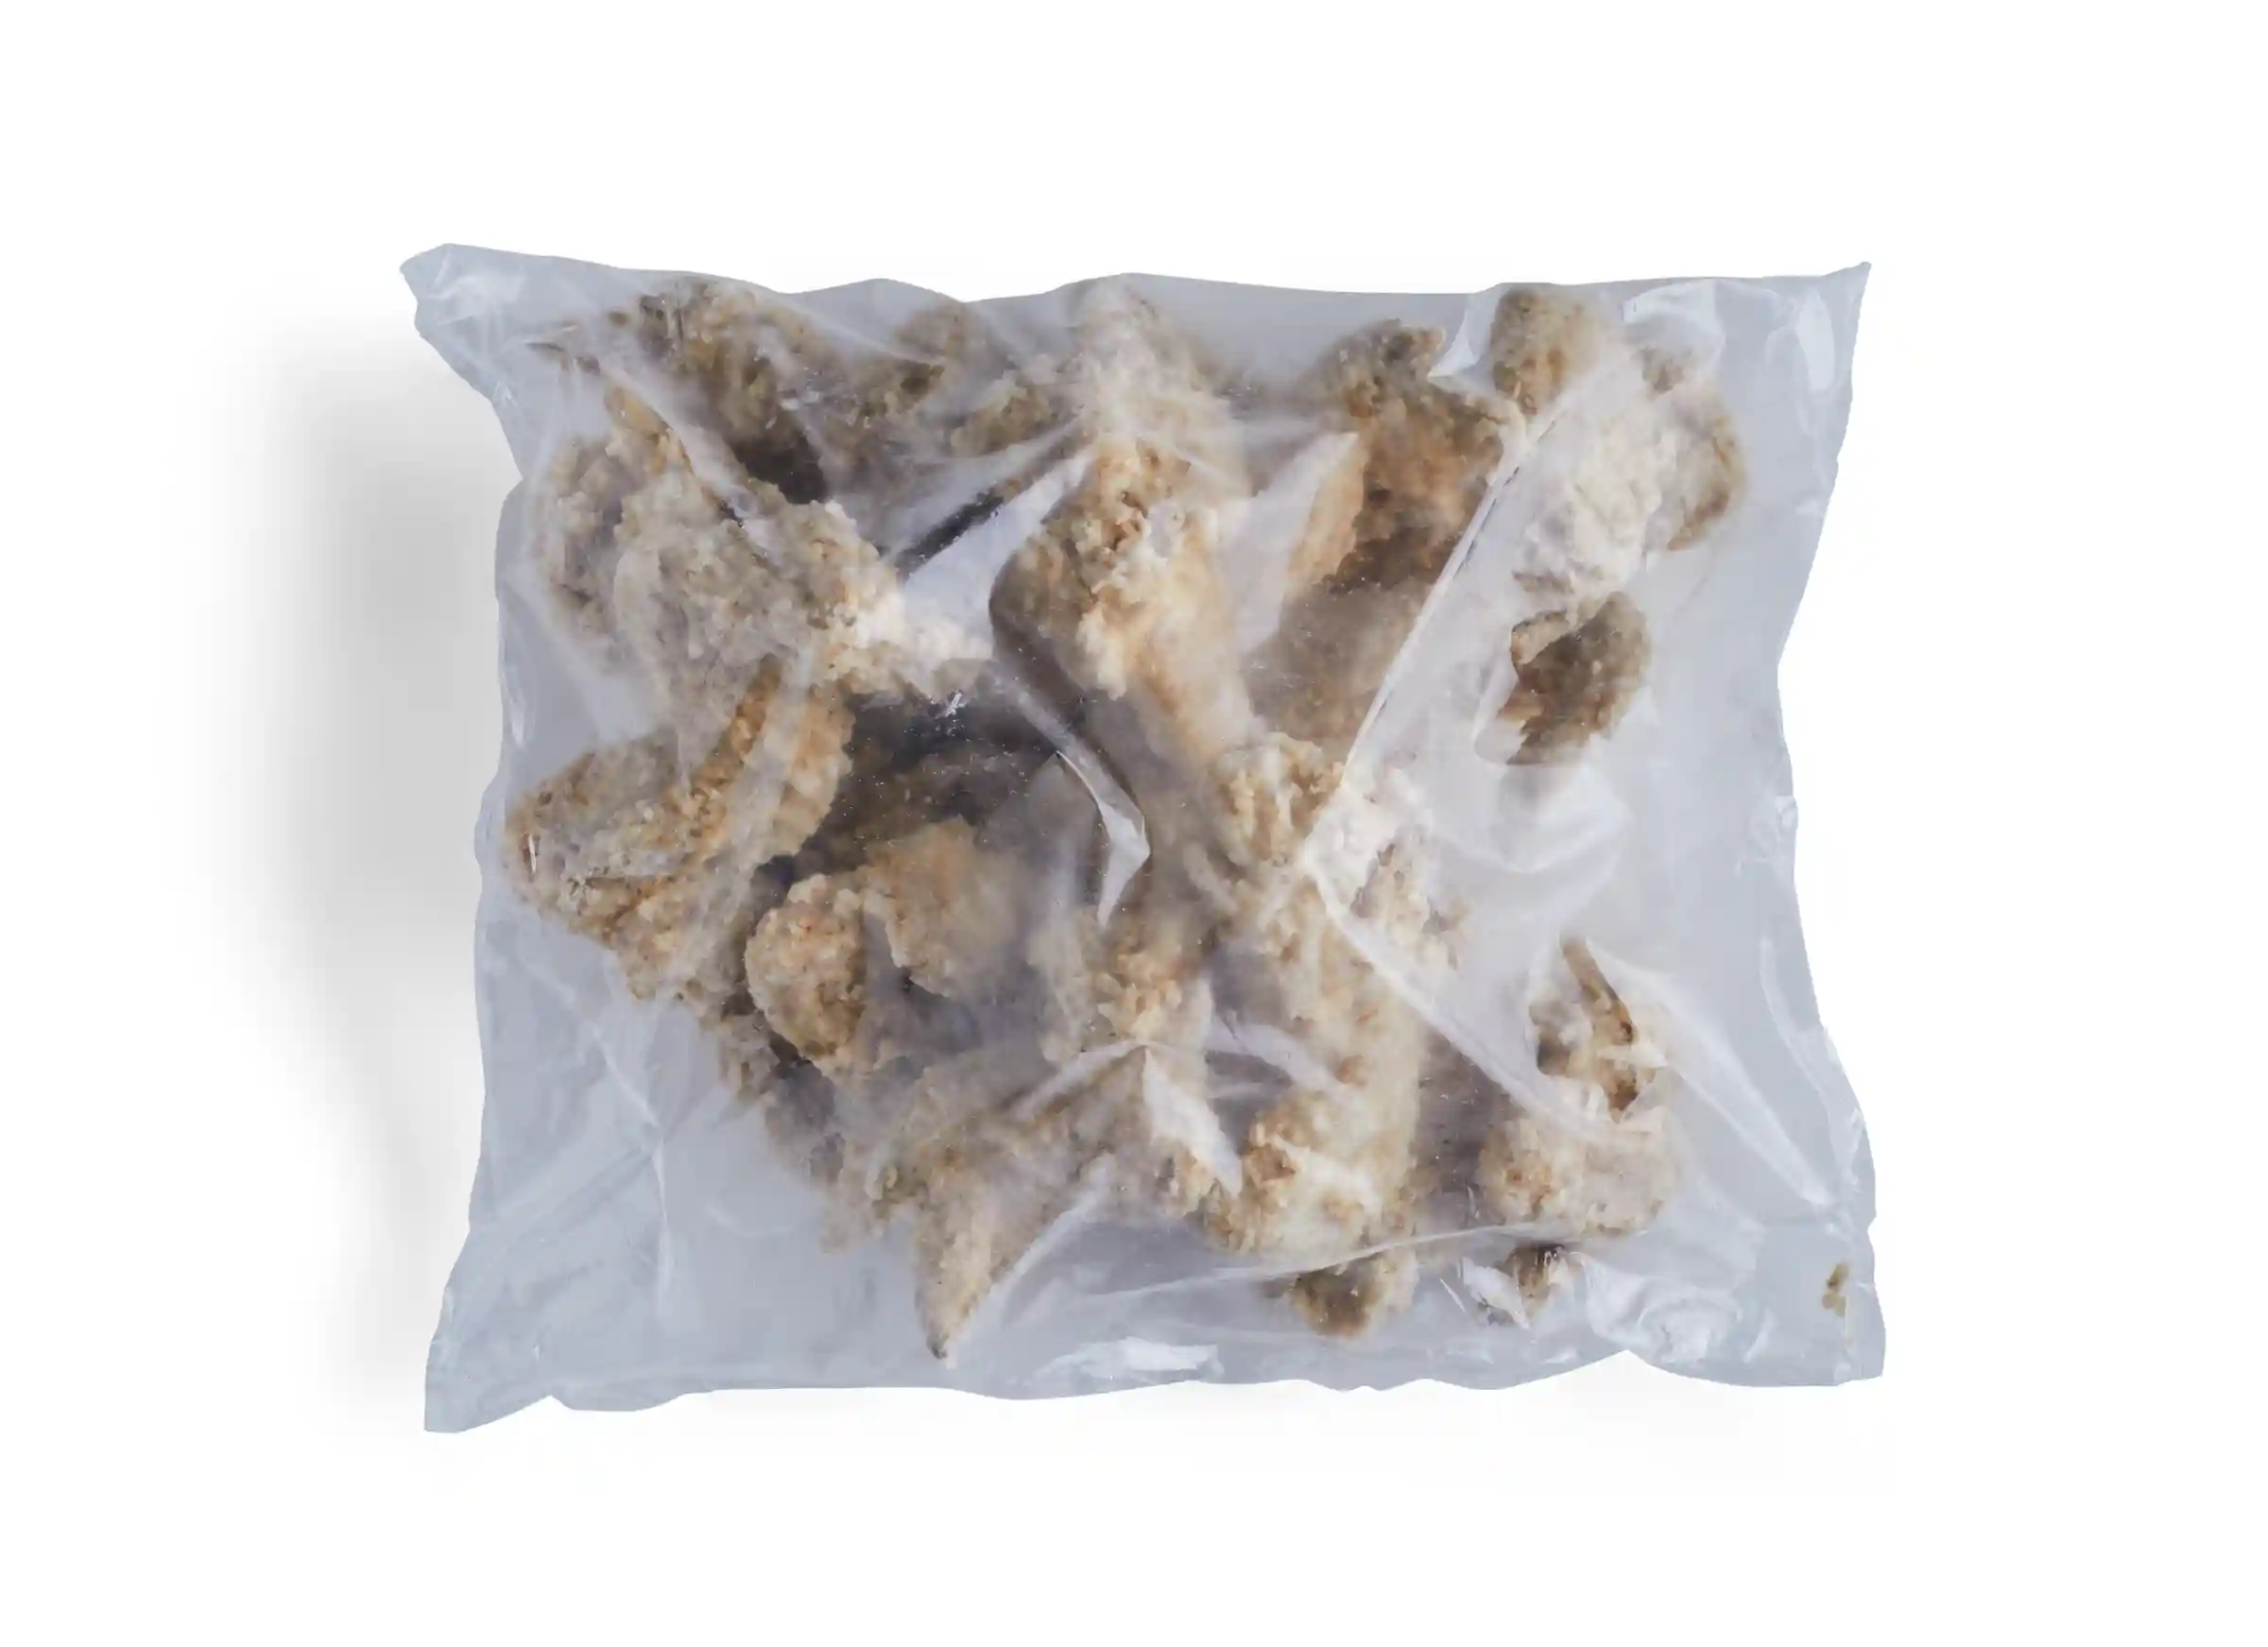 Tyson's Pride® Fully Cooked Breaded Bone-In Chicken Wings_image_21